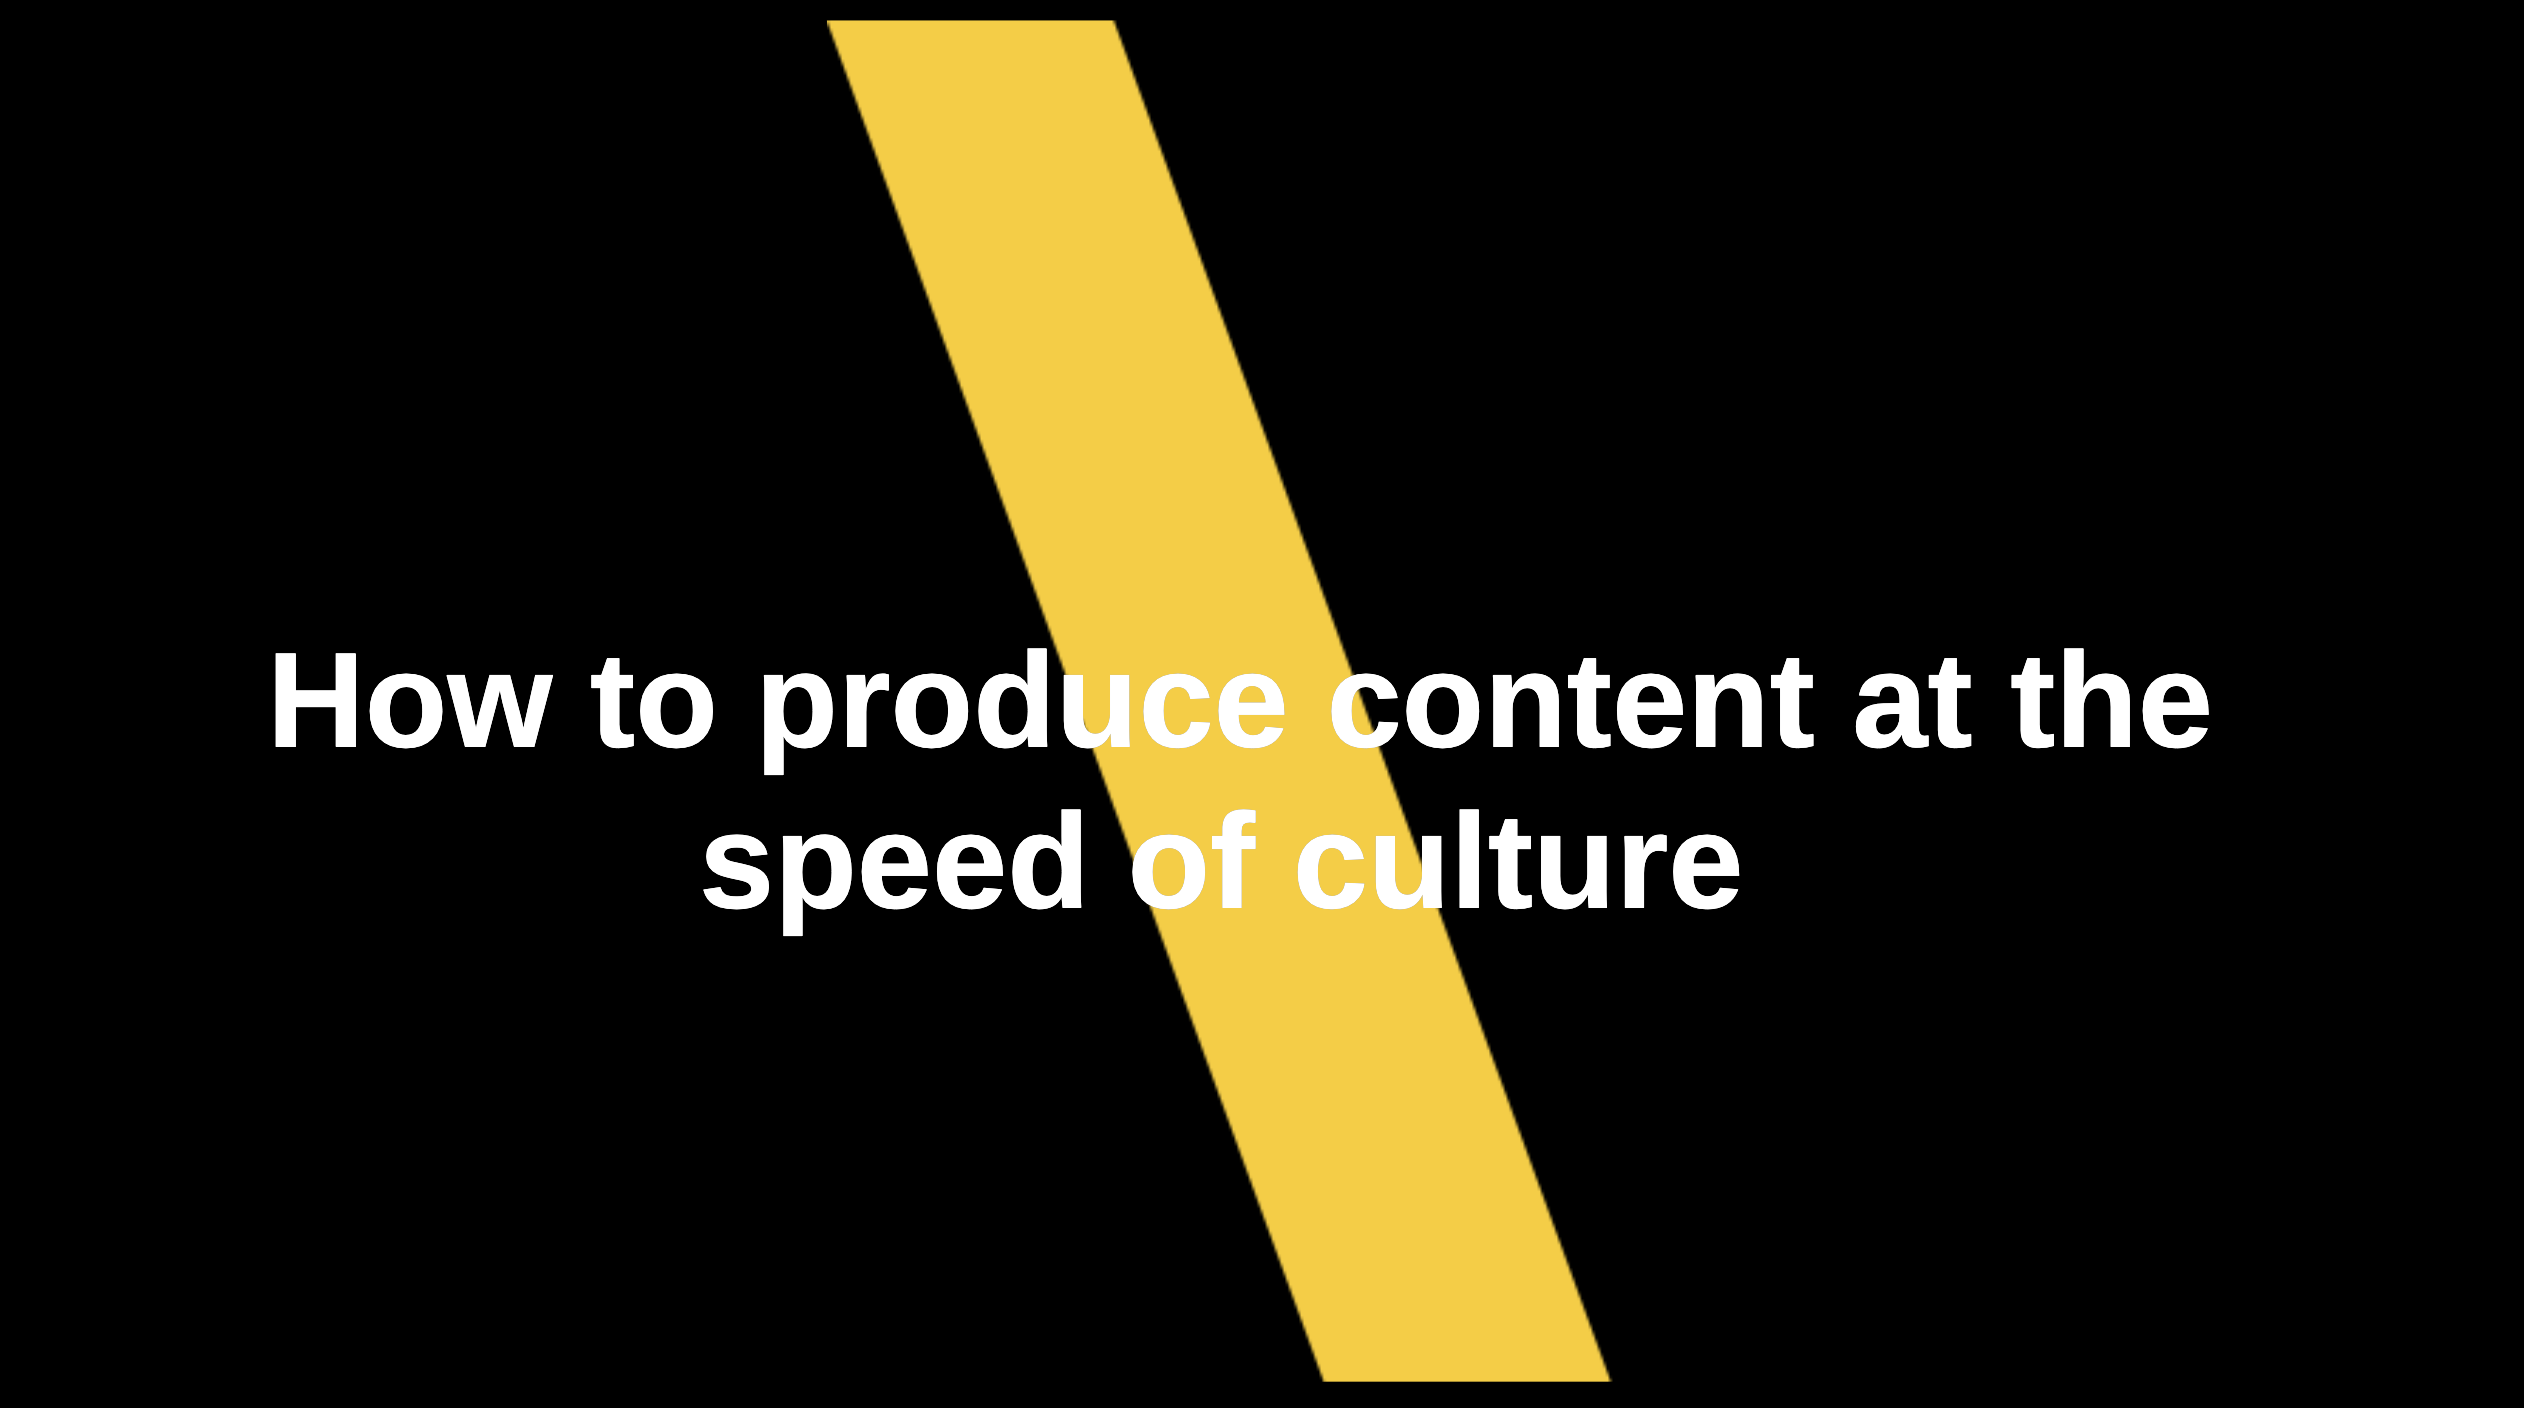 How to produce content at the speed of culture